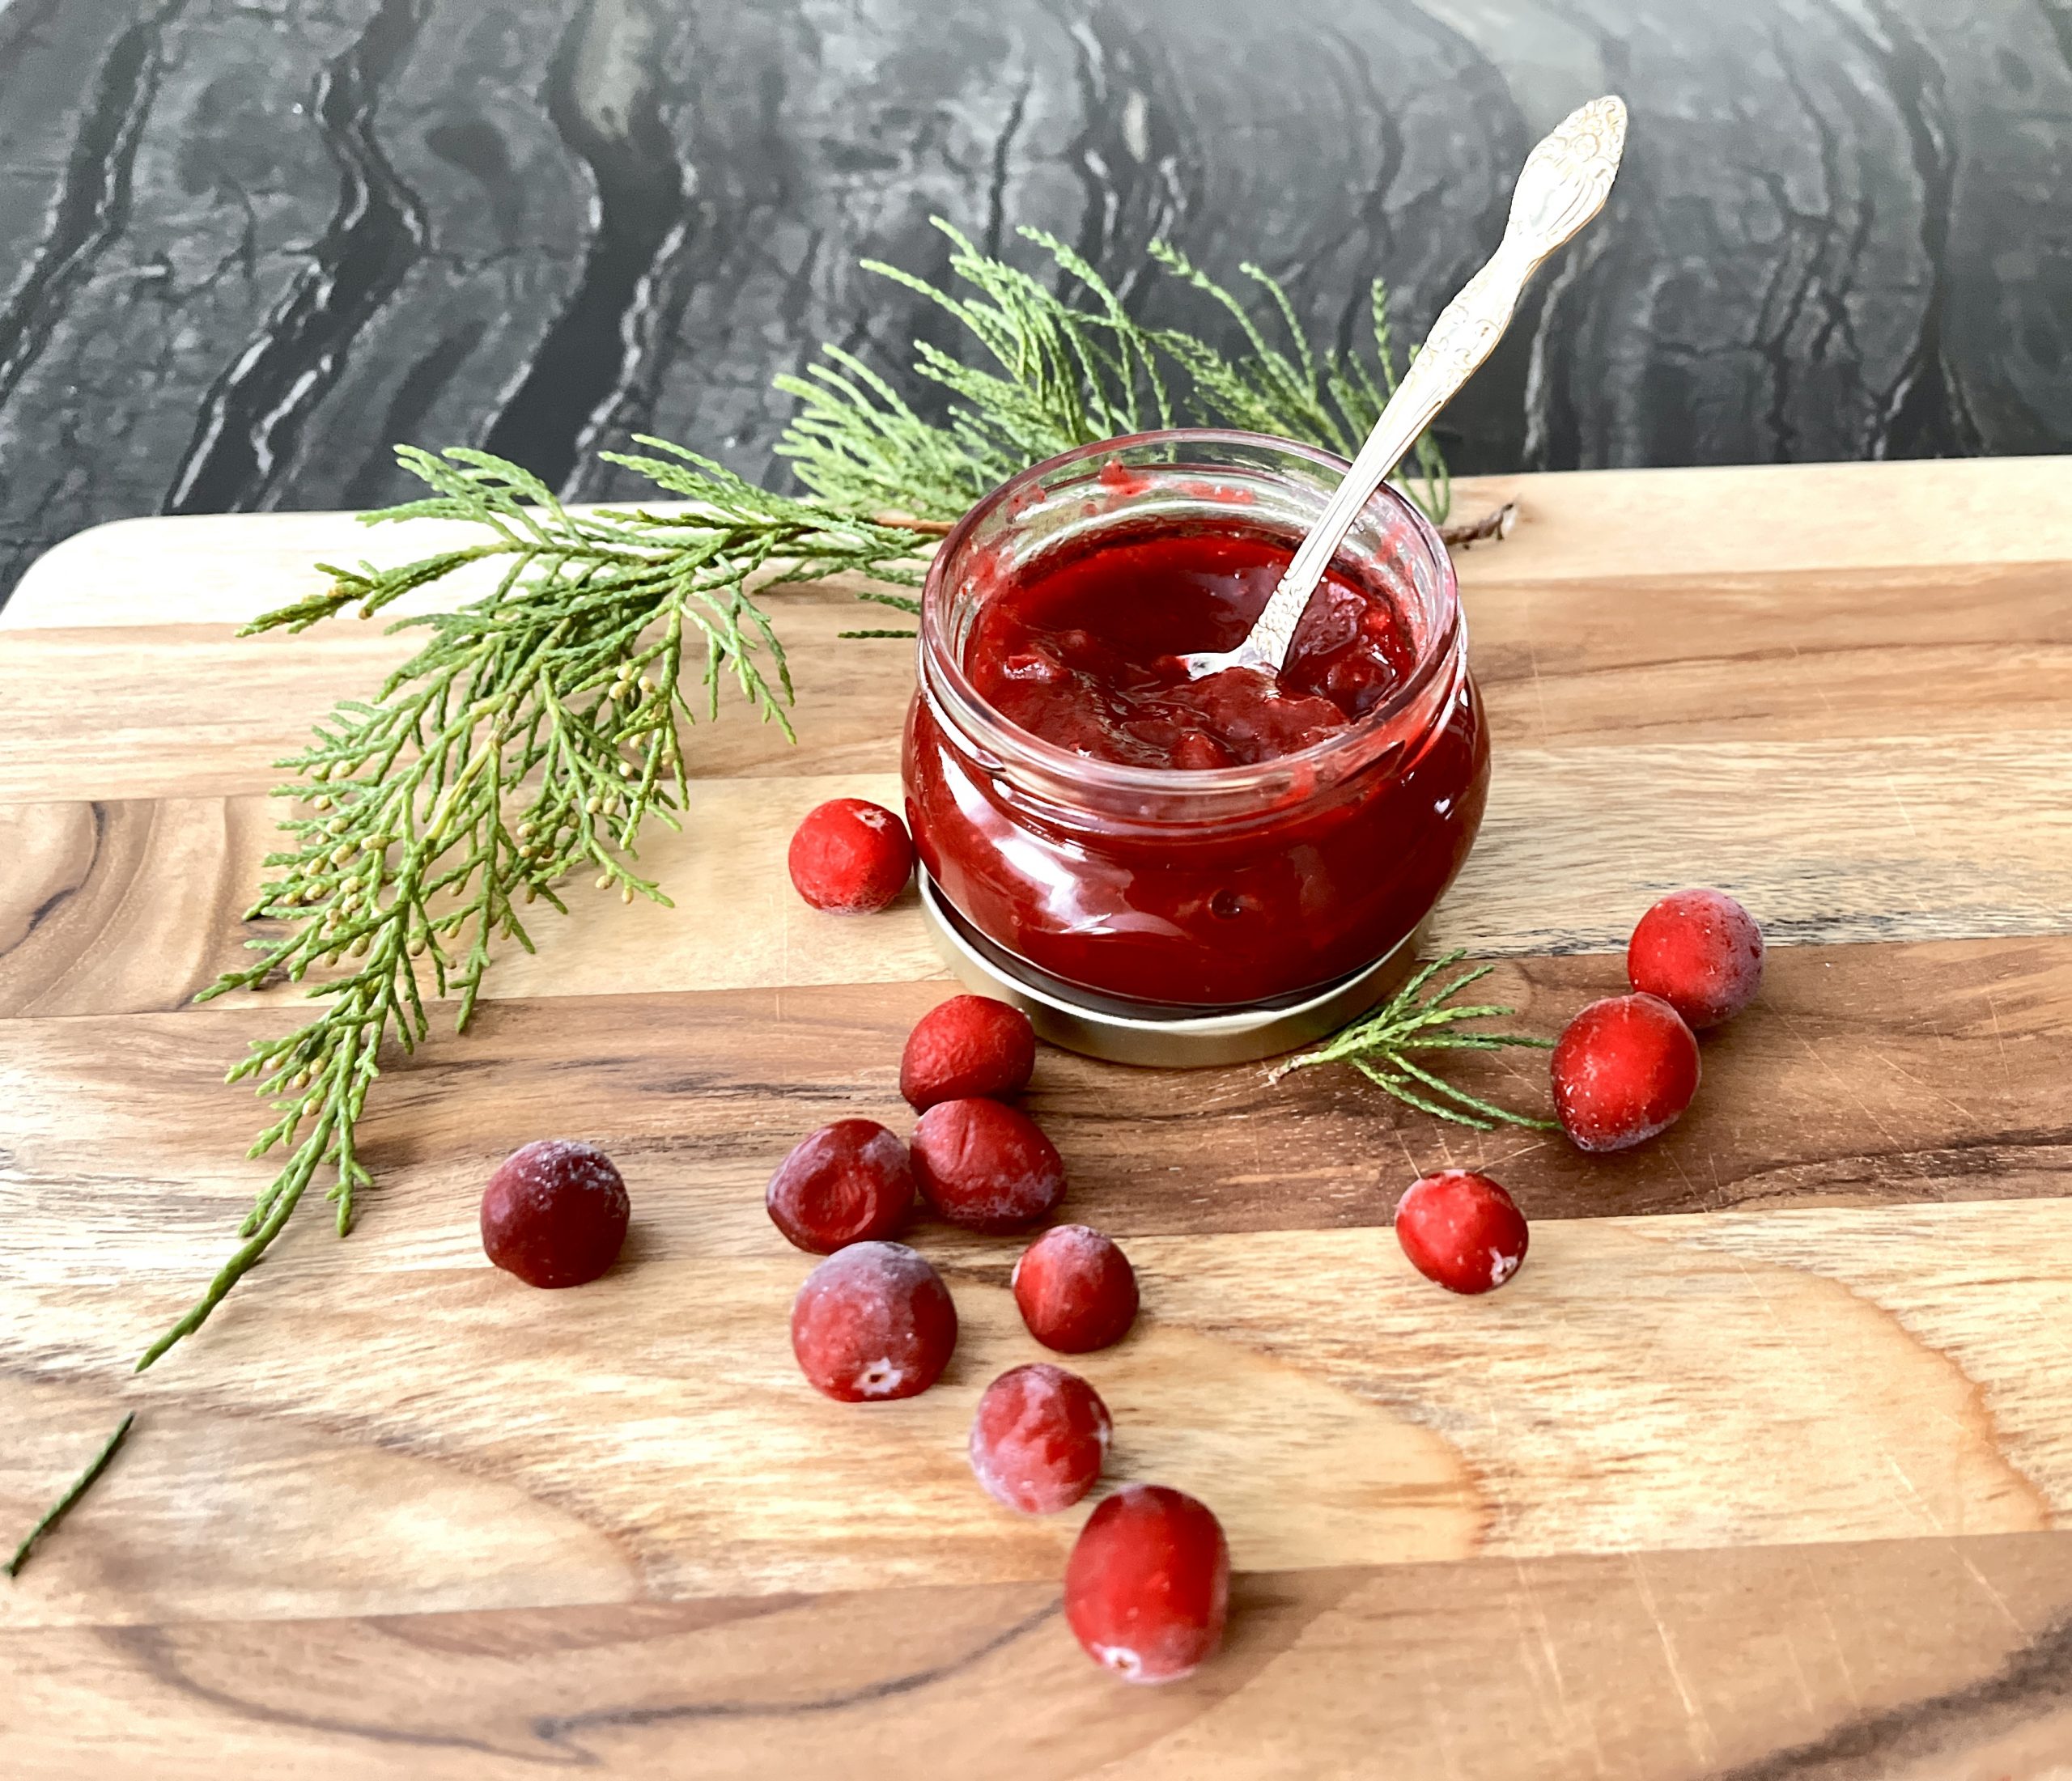 Learn How To Make Cranberry Sauce With Orange Juice